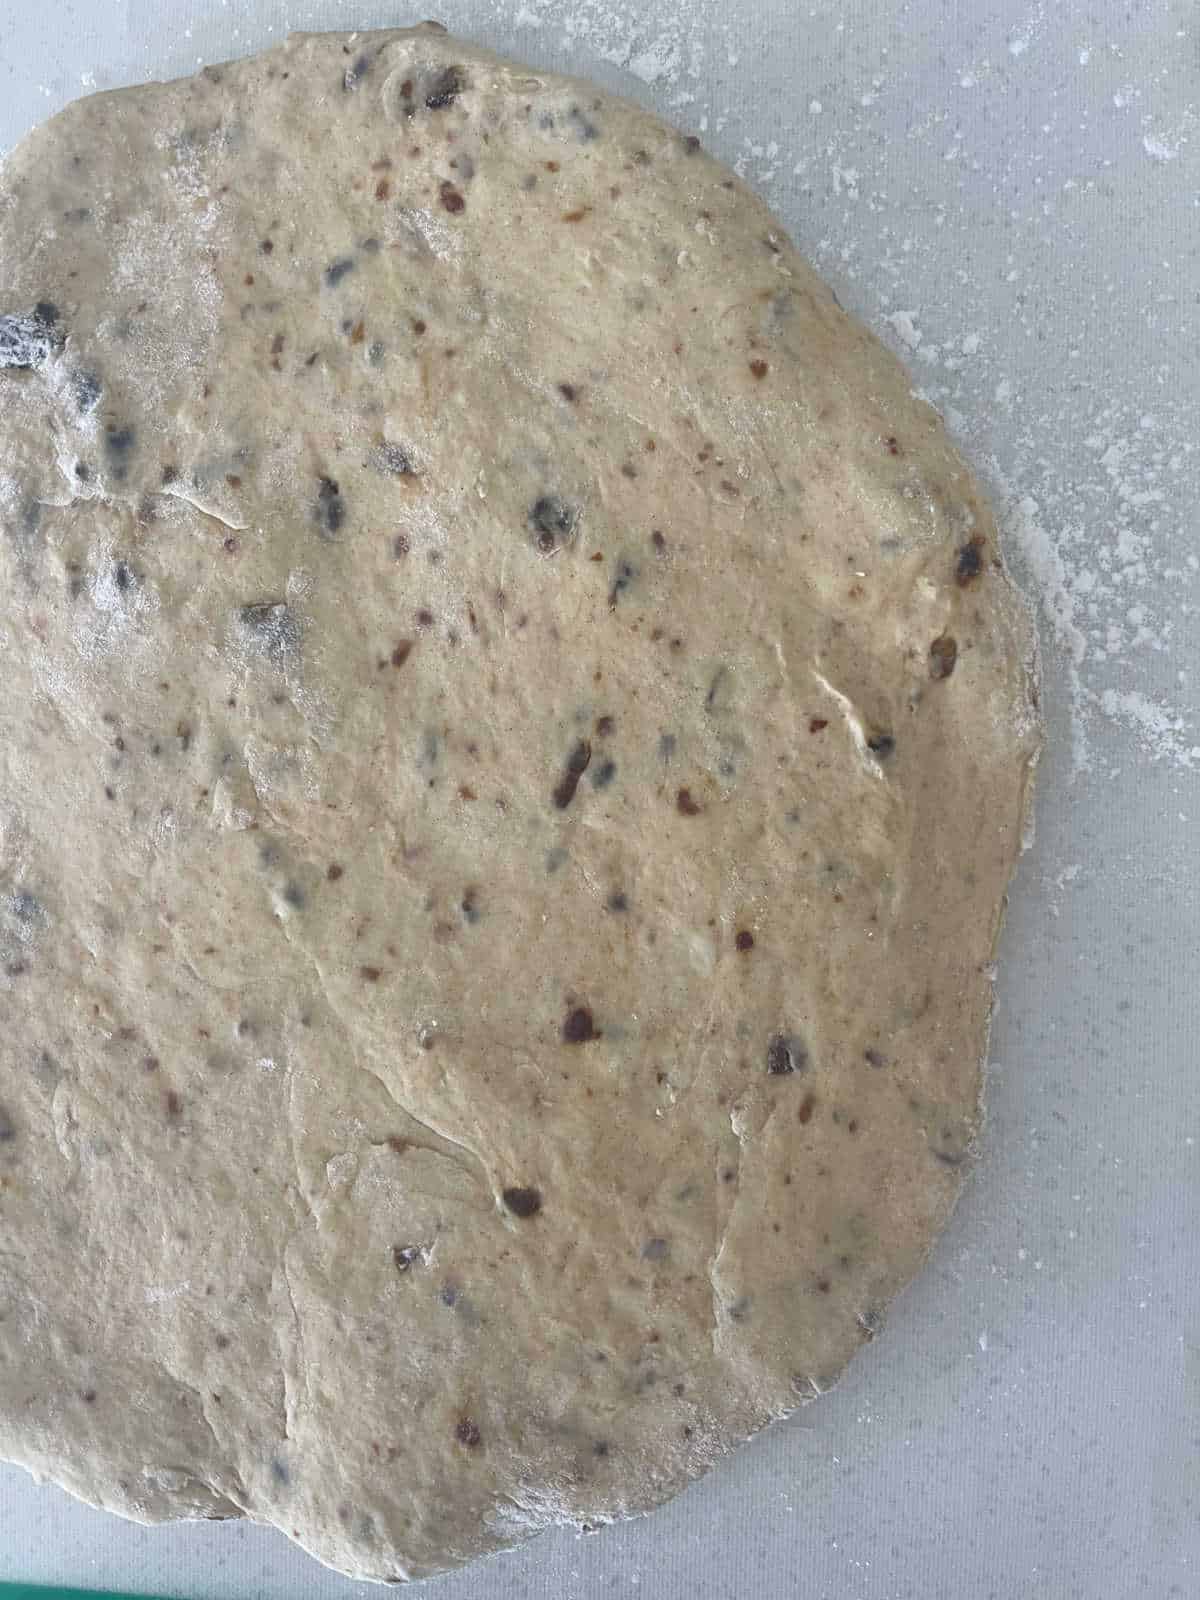 Date scone mixture rolled out on a thermomat.